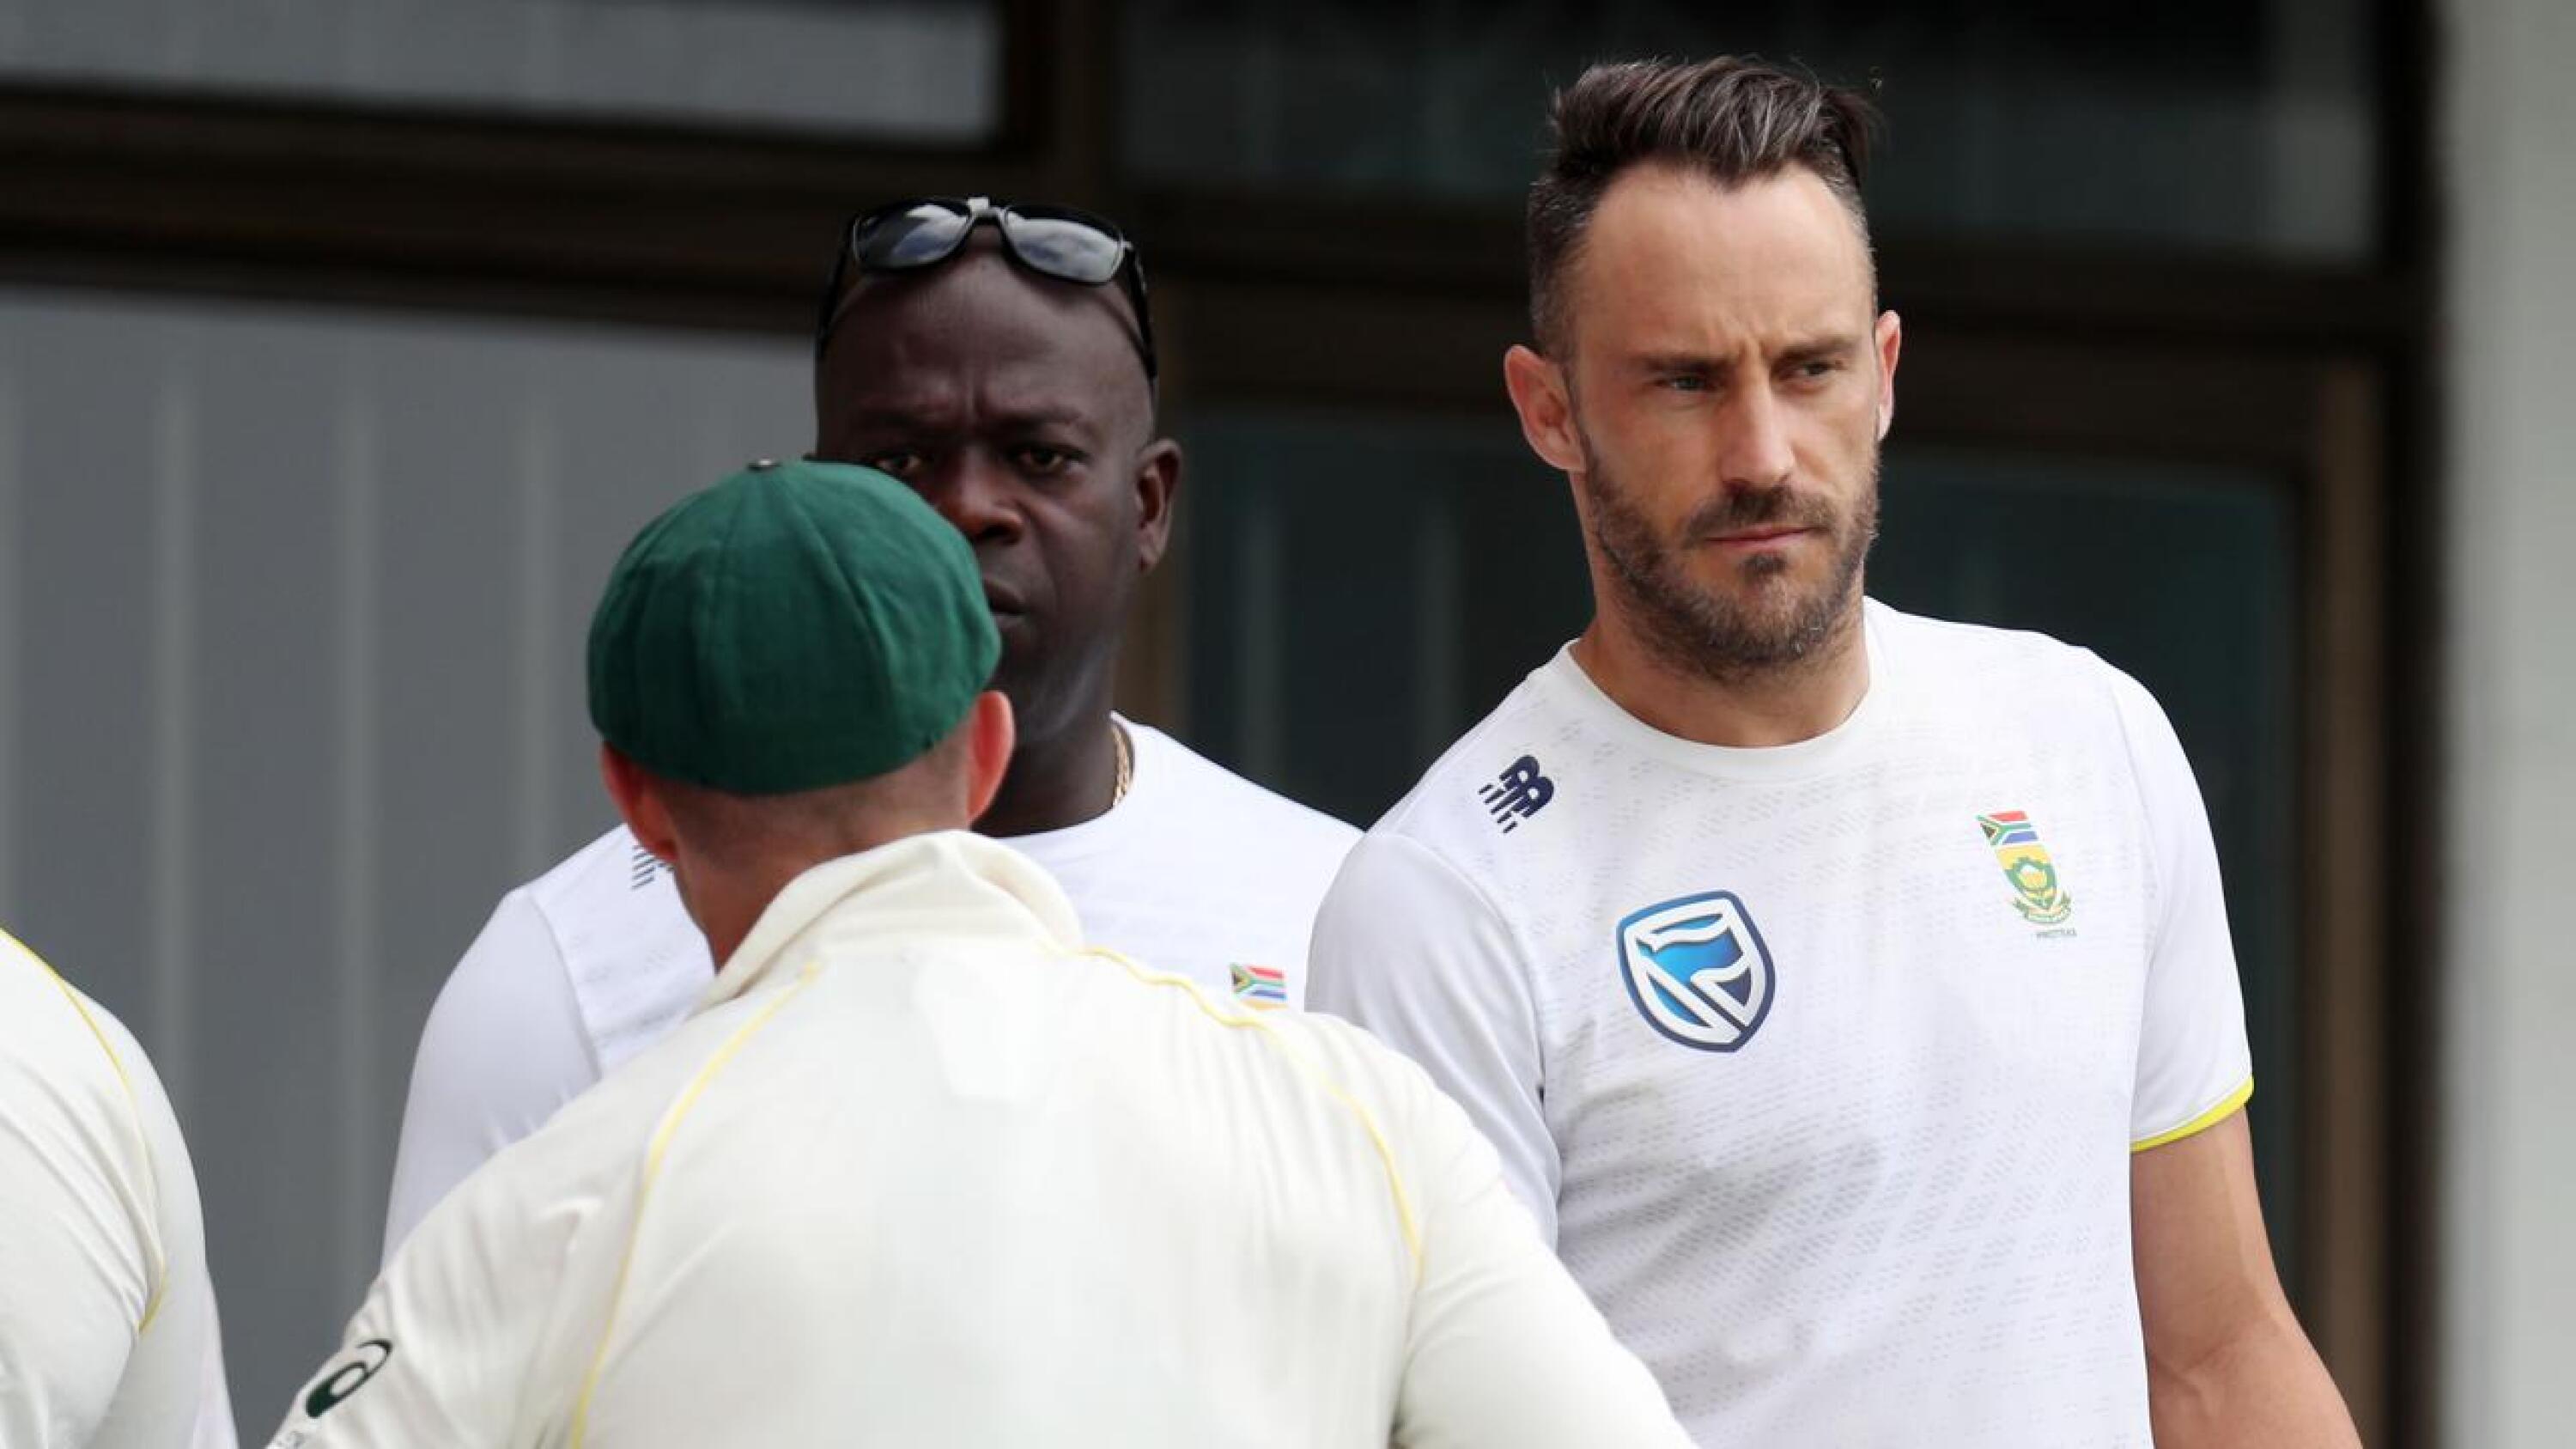 Proteas skipper Faf du Plessis shakes hands with David Warner after the conclusion of the 2018 Durban Test match